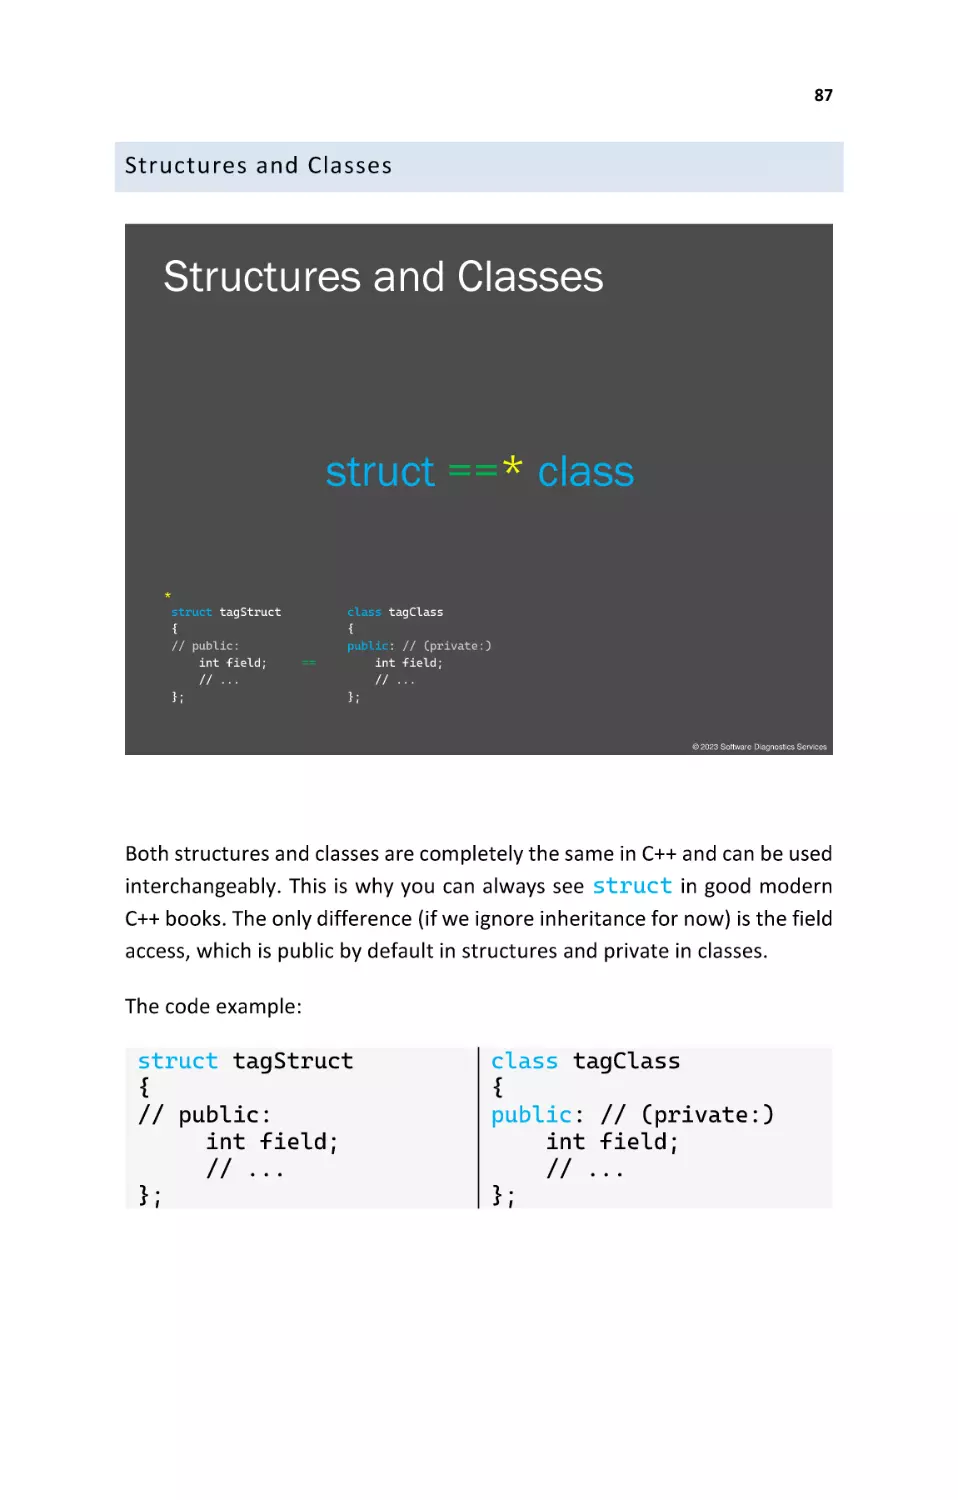 Structures and Classes